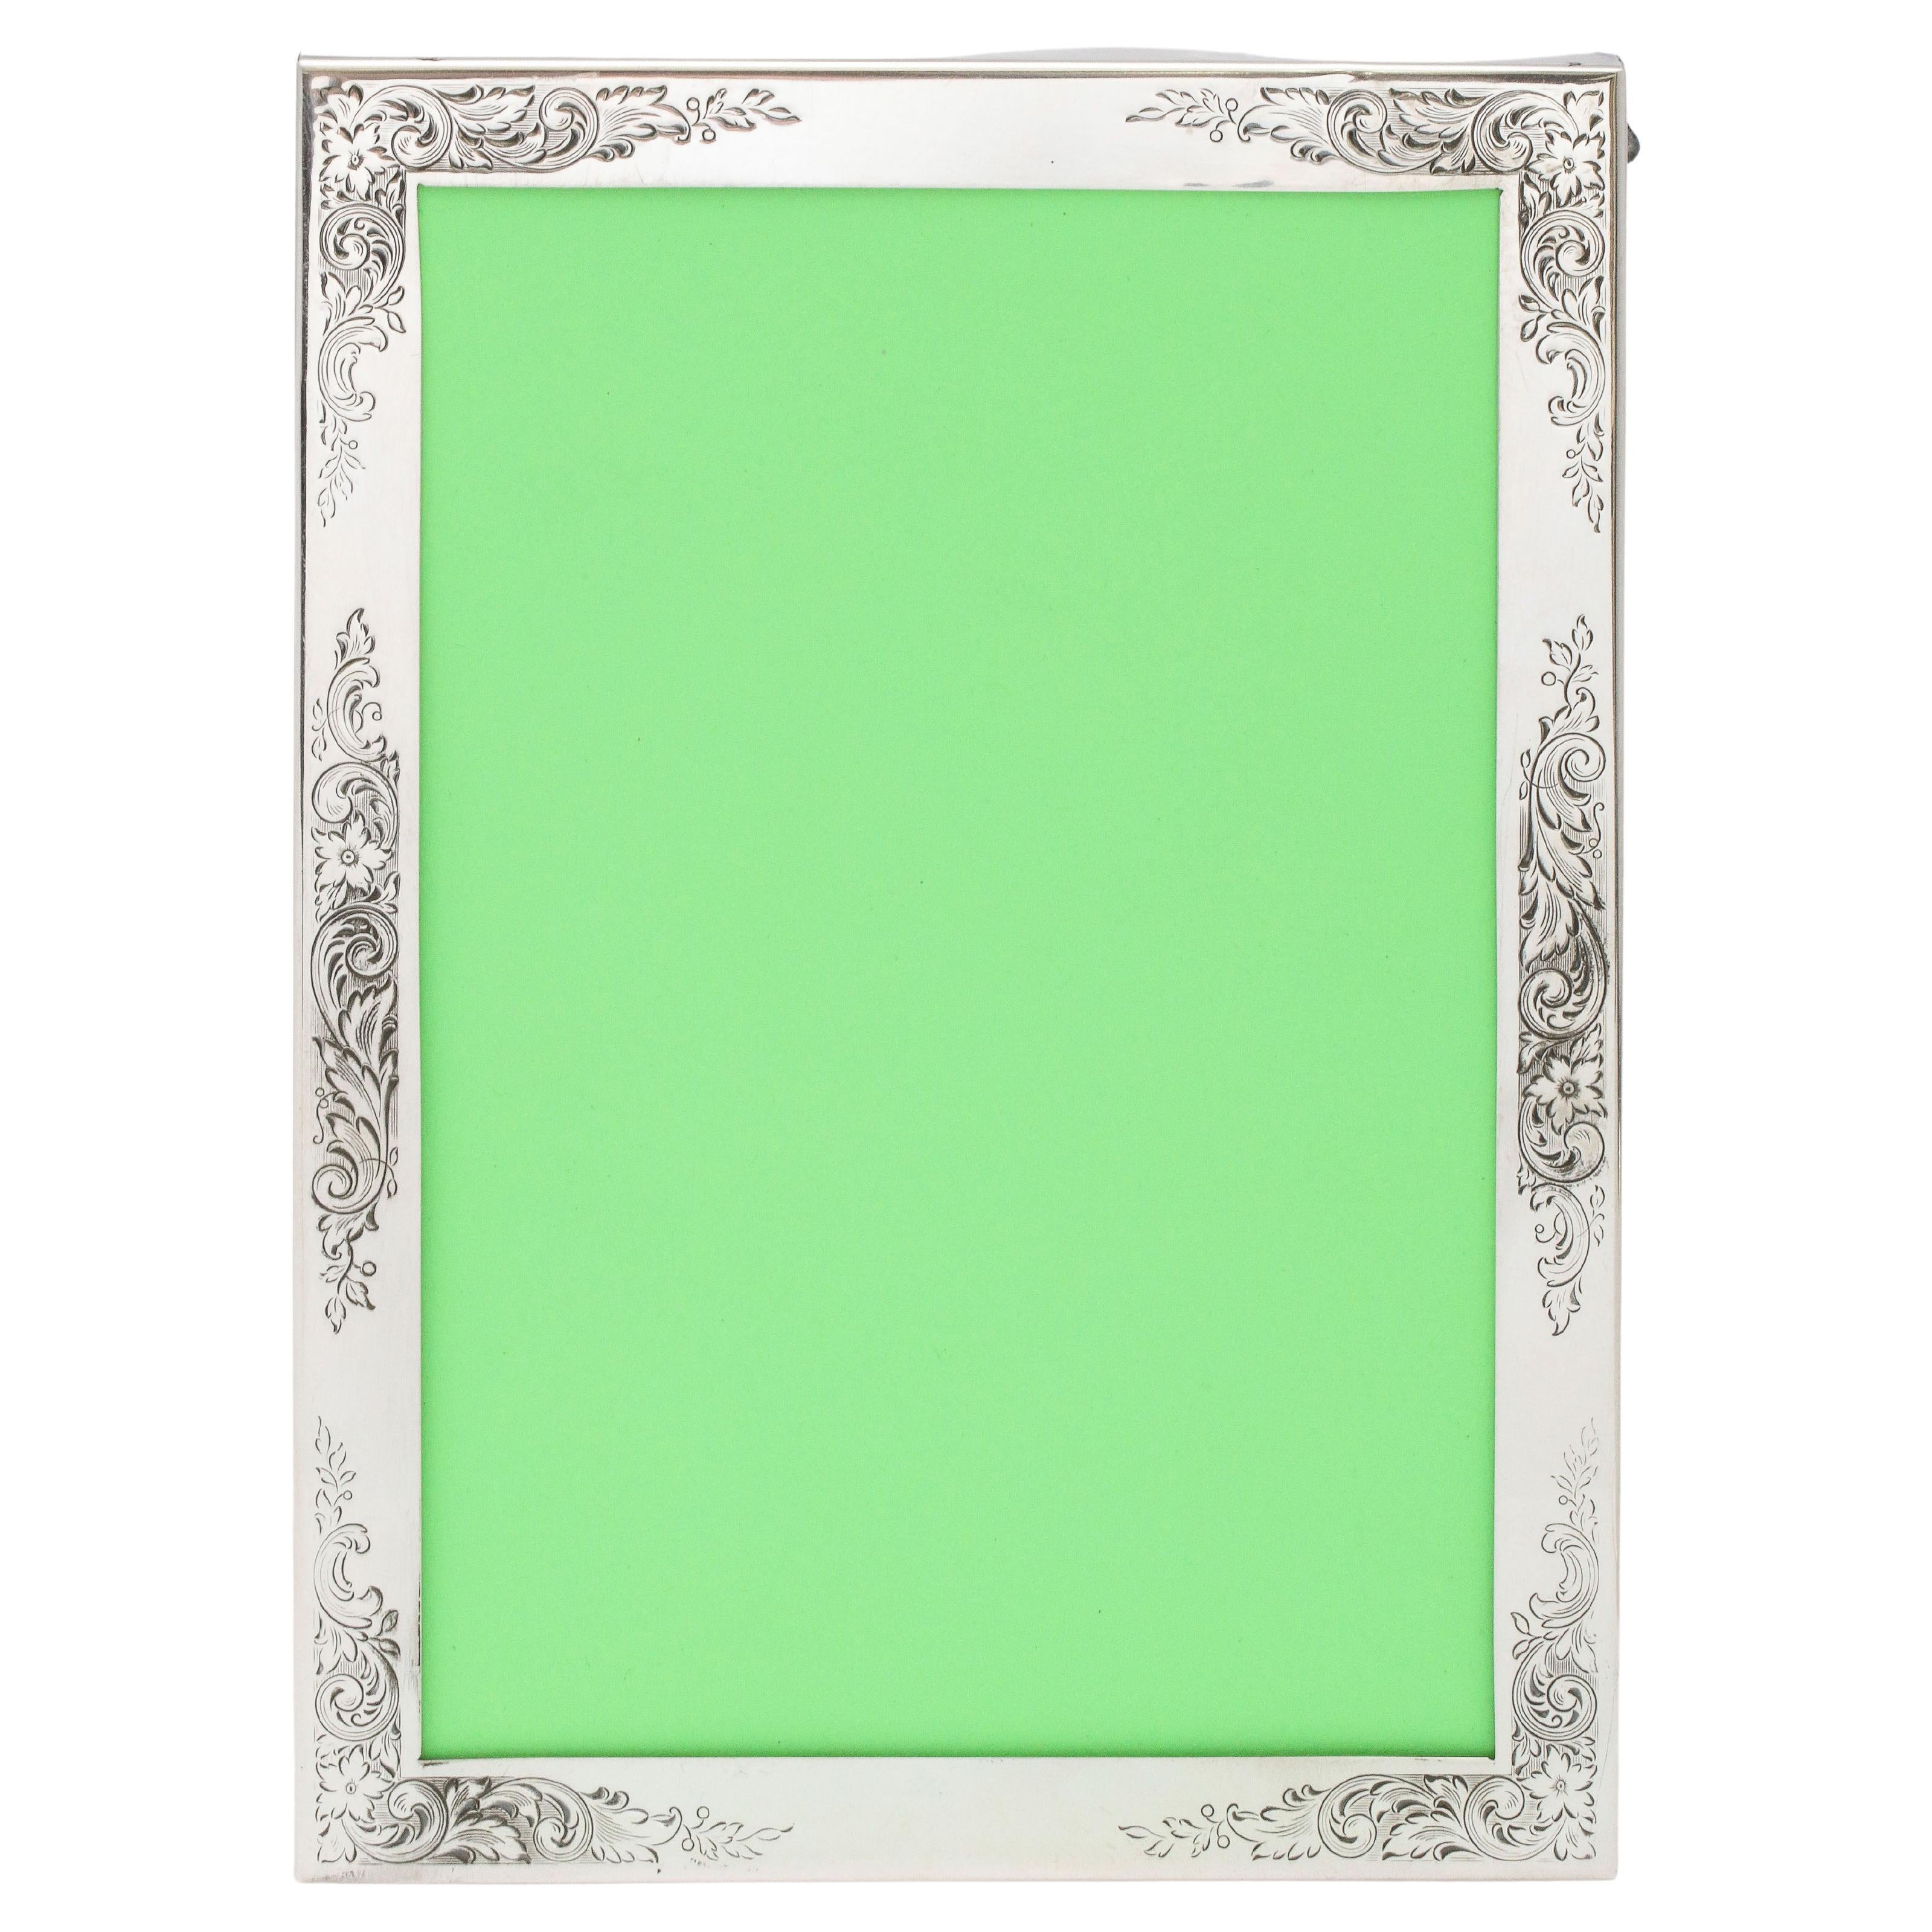 Edwardian-Style Sterling Silver Picture Frame with Wood Back